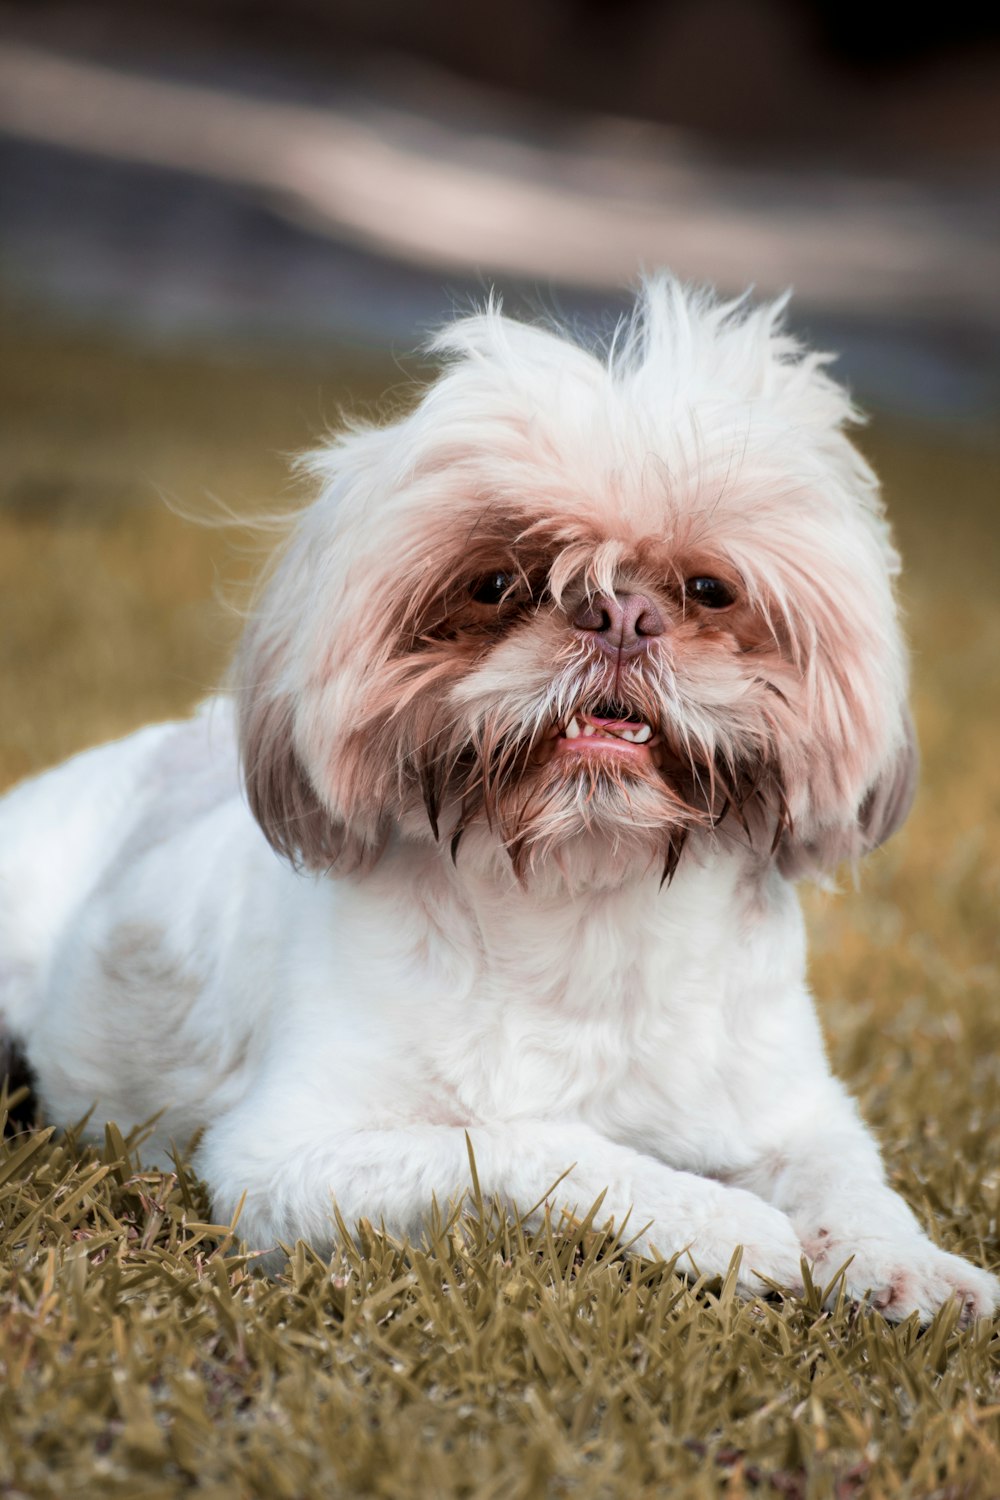 white and brown shih tzu puppy on brown and green grass field during daytime